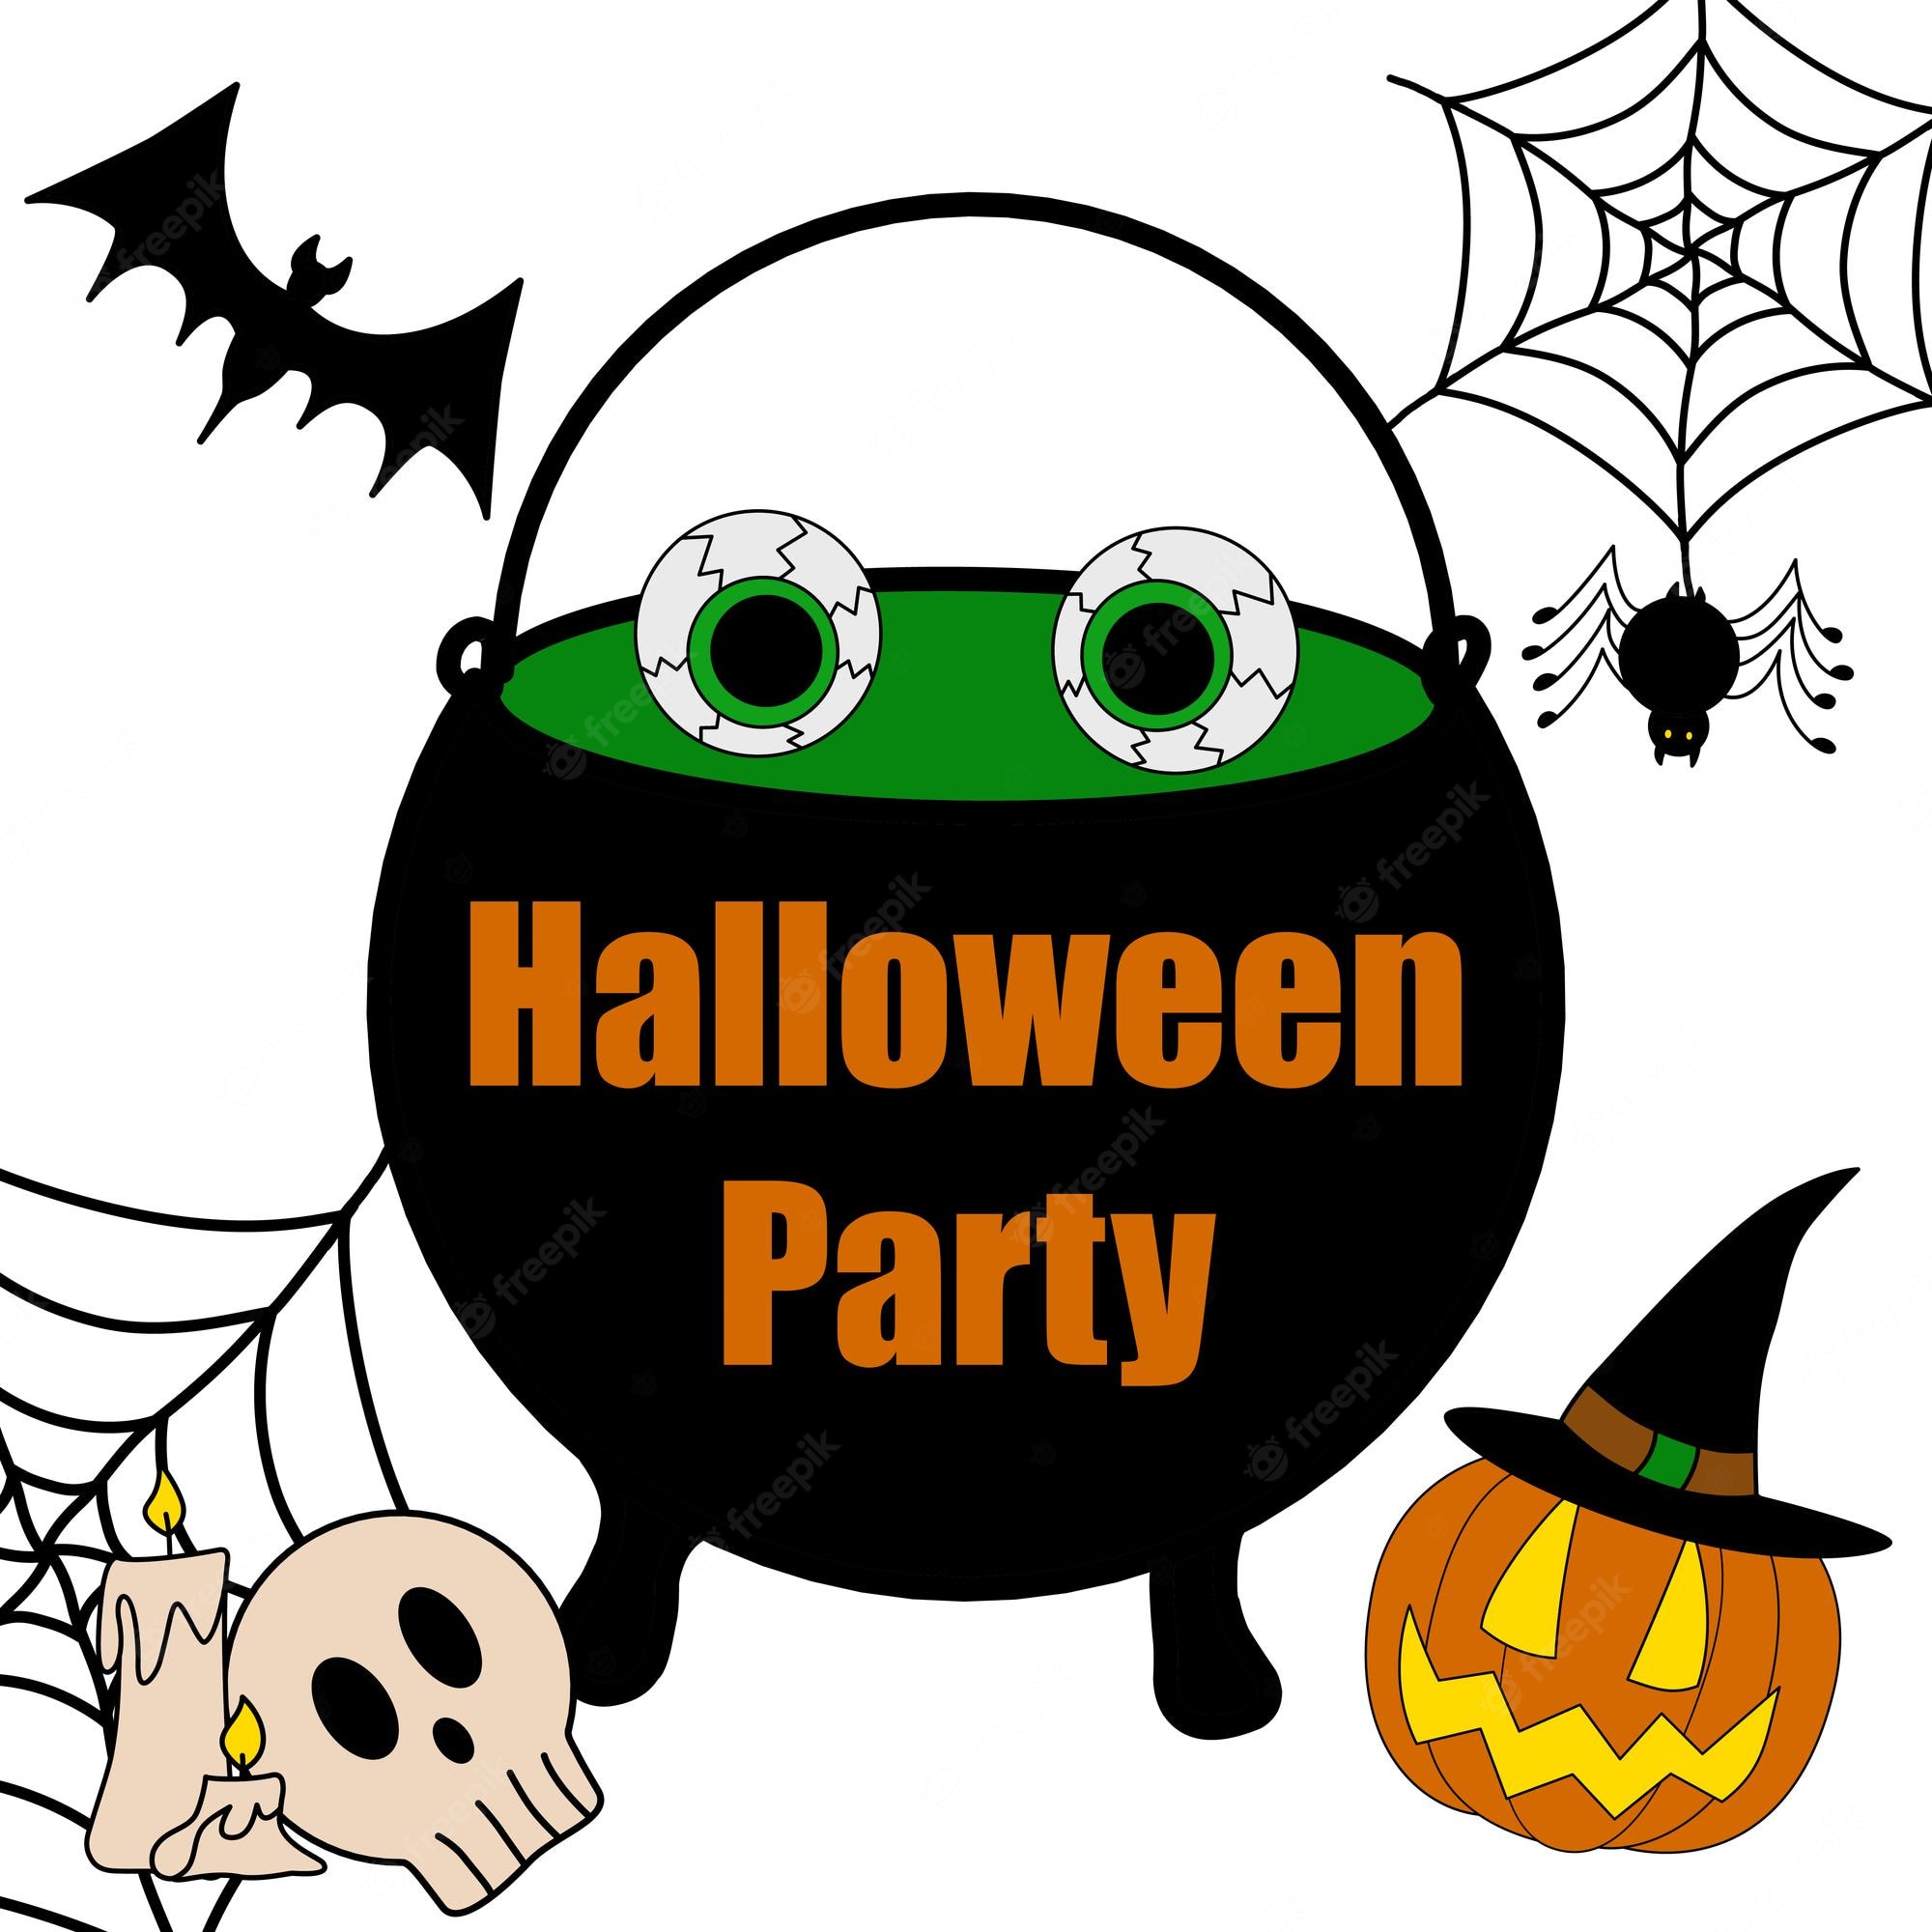 halloween-party-clipart-21296110 | - Clip Art Library